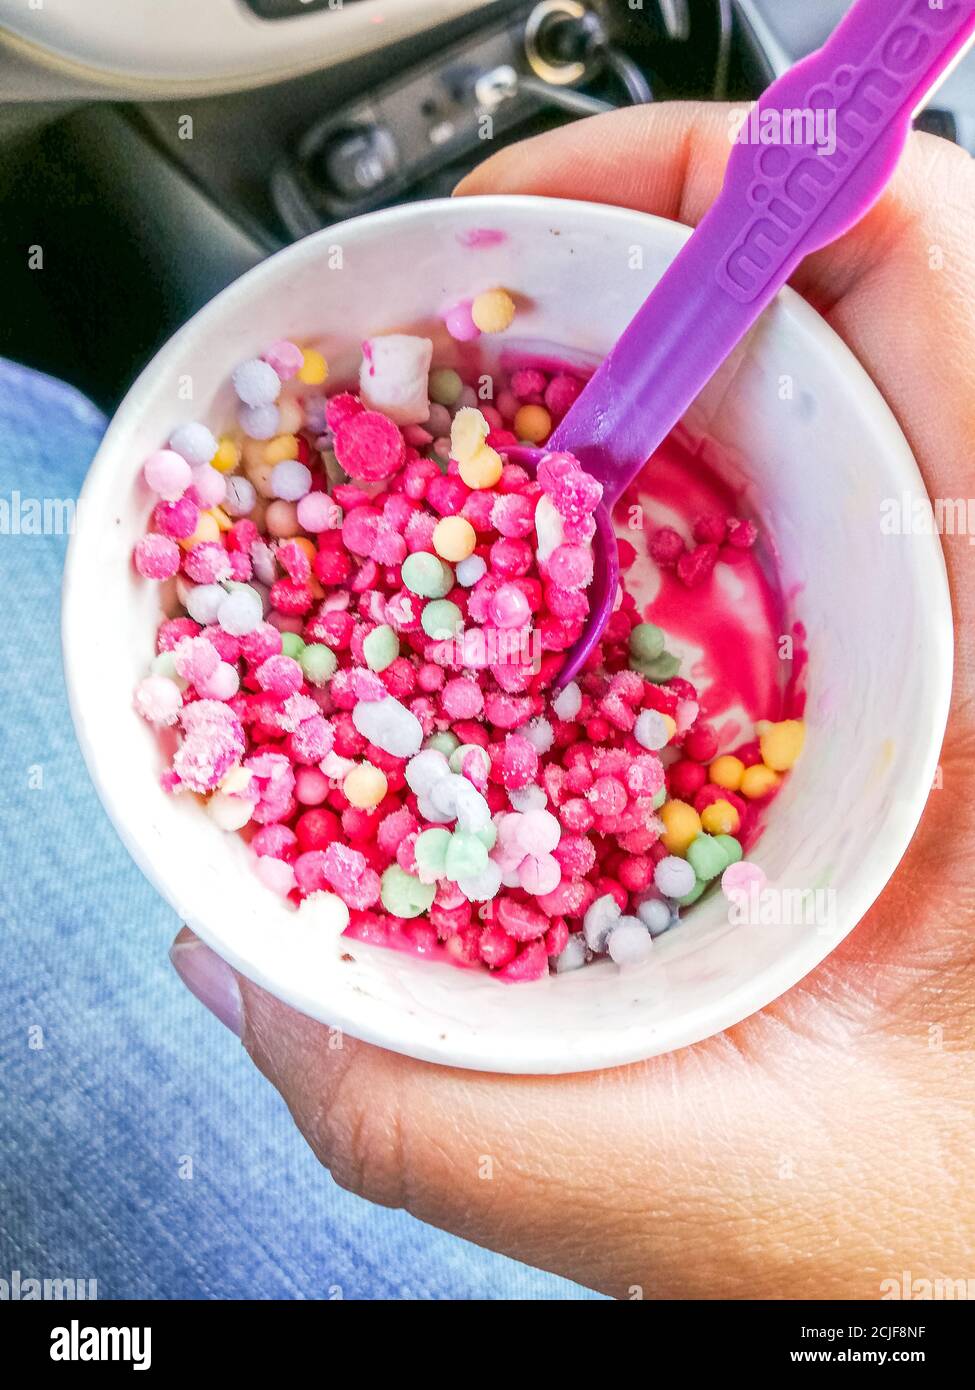 Ice cream mini melts small balls, various flavor icecream dots in small  paper in girl hand Stock Photo - Alamy